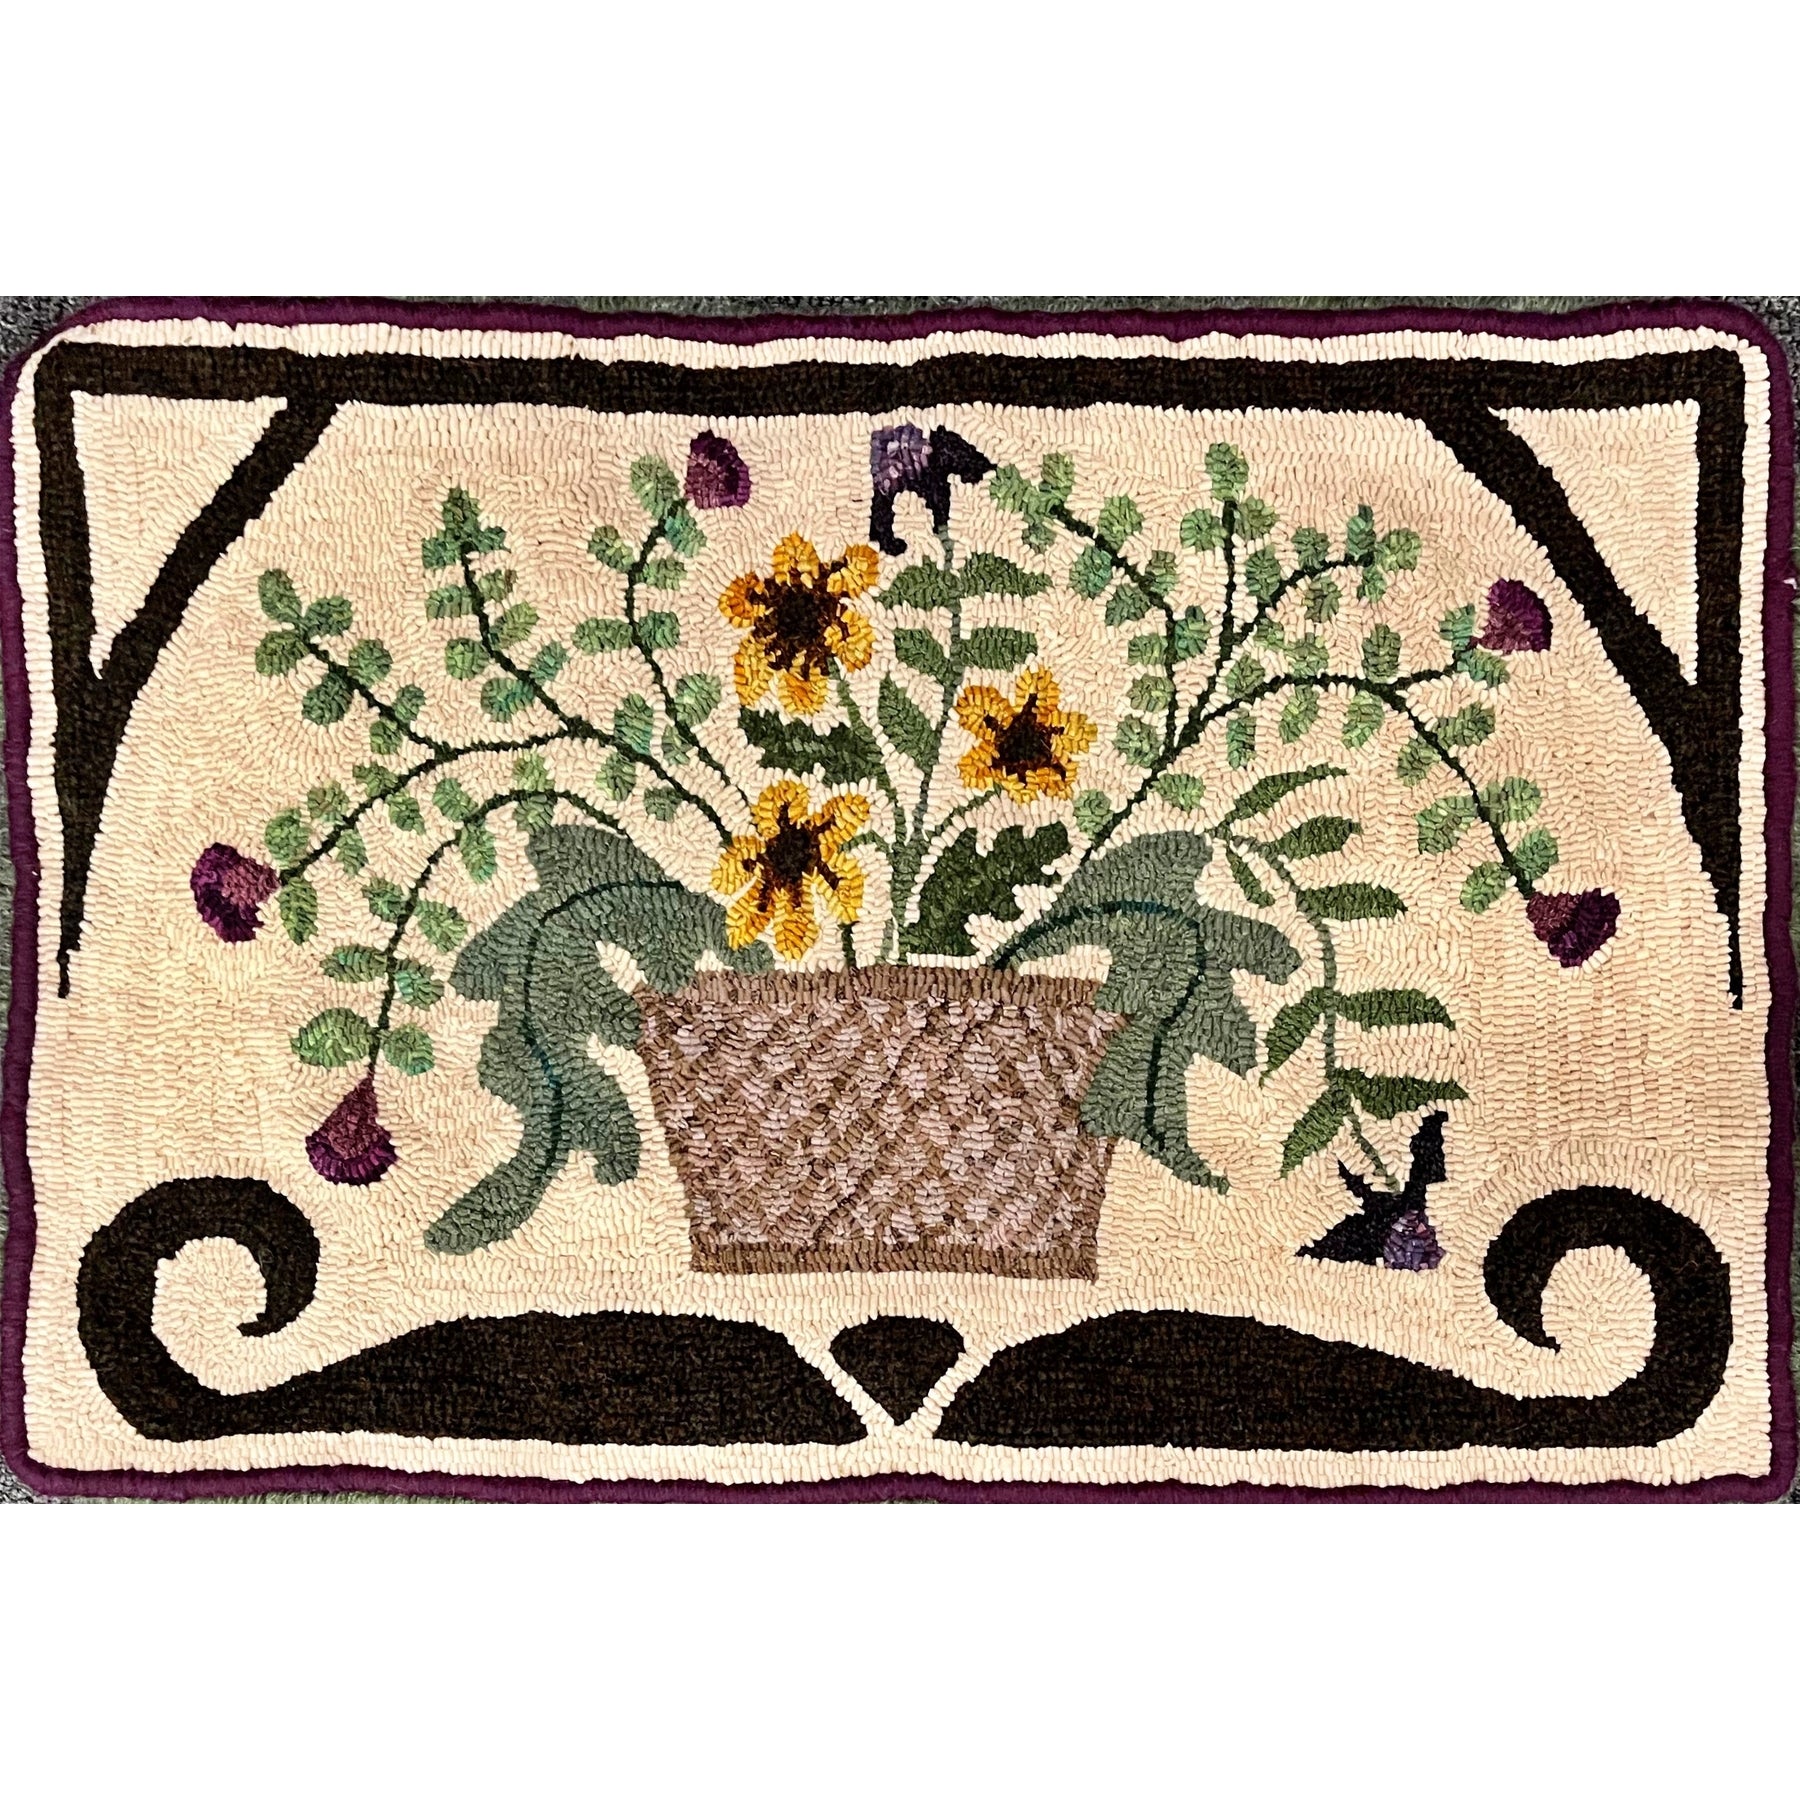 Basket Of Flowers, rug hooked by Donna Null